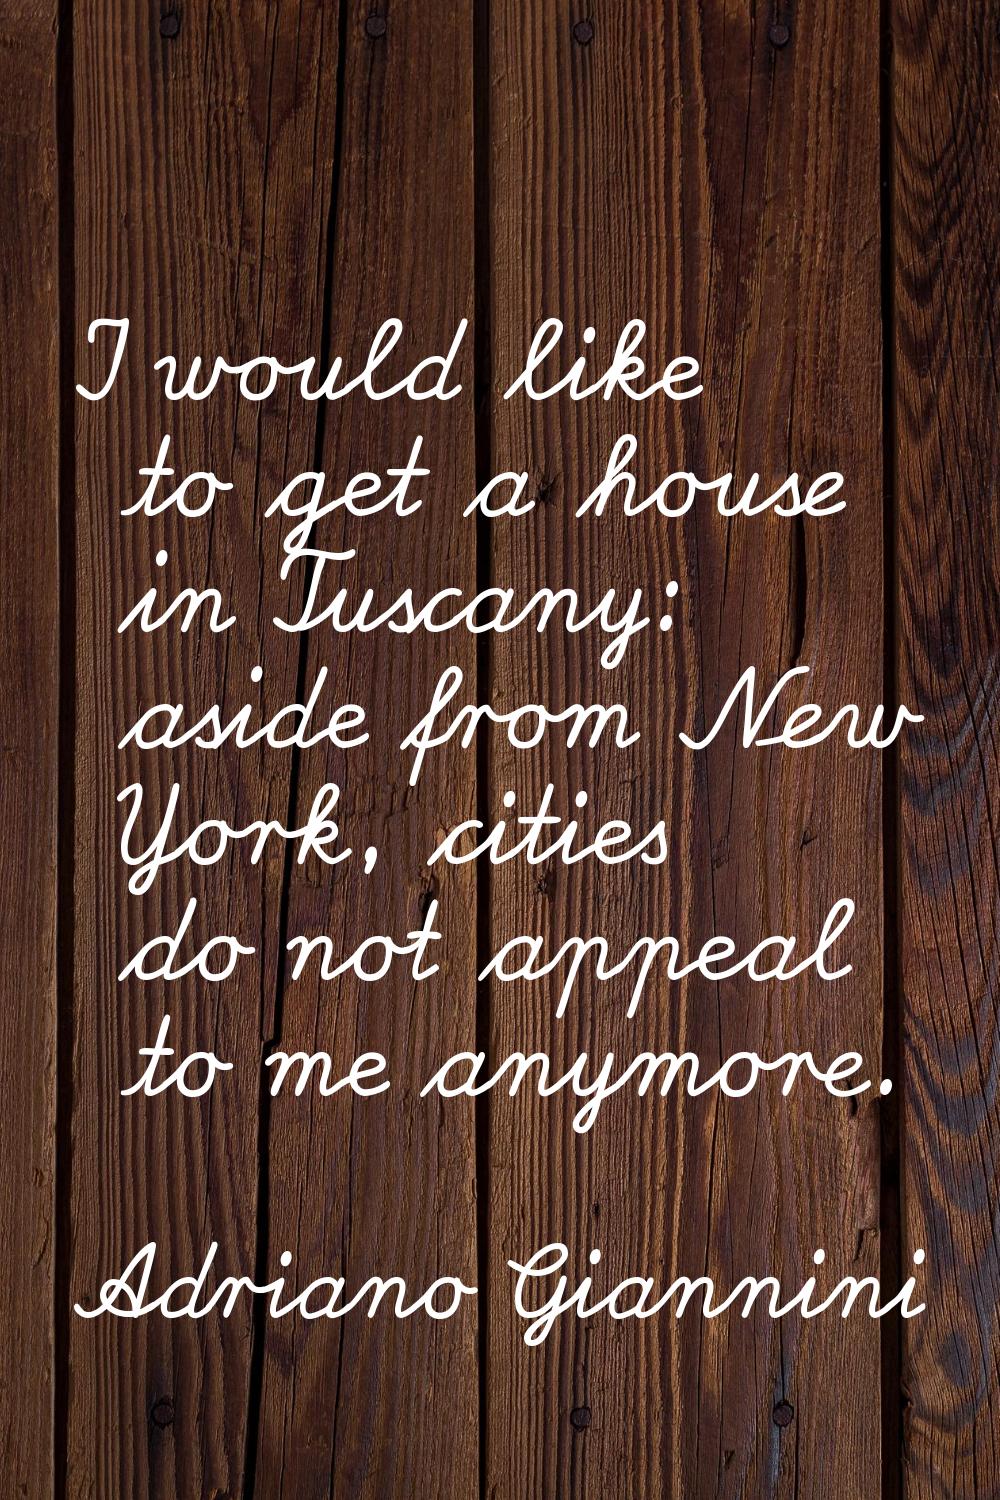 I would like to get a house in Tuscany: aside from New York, cities do not appeal to me anymore.